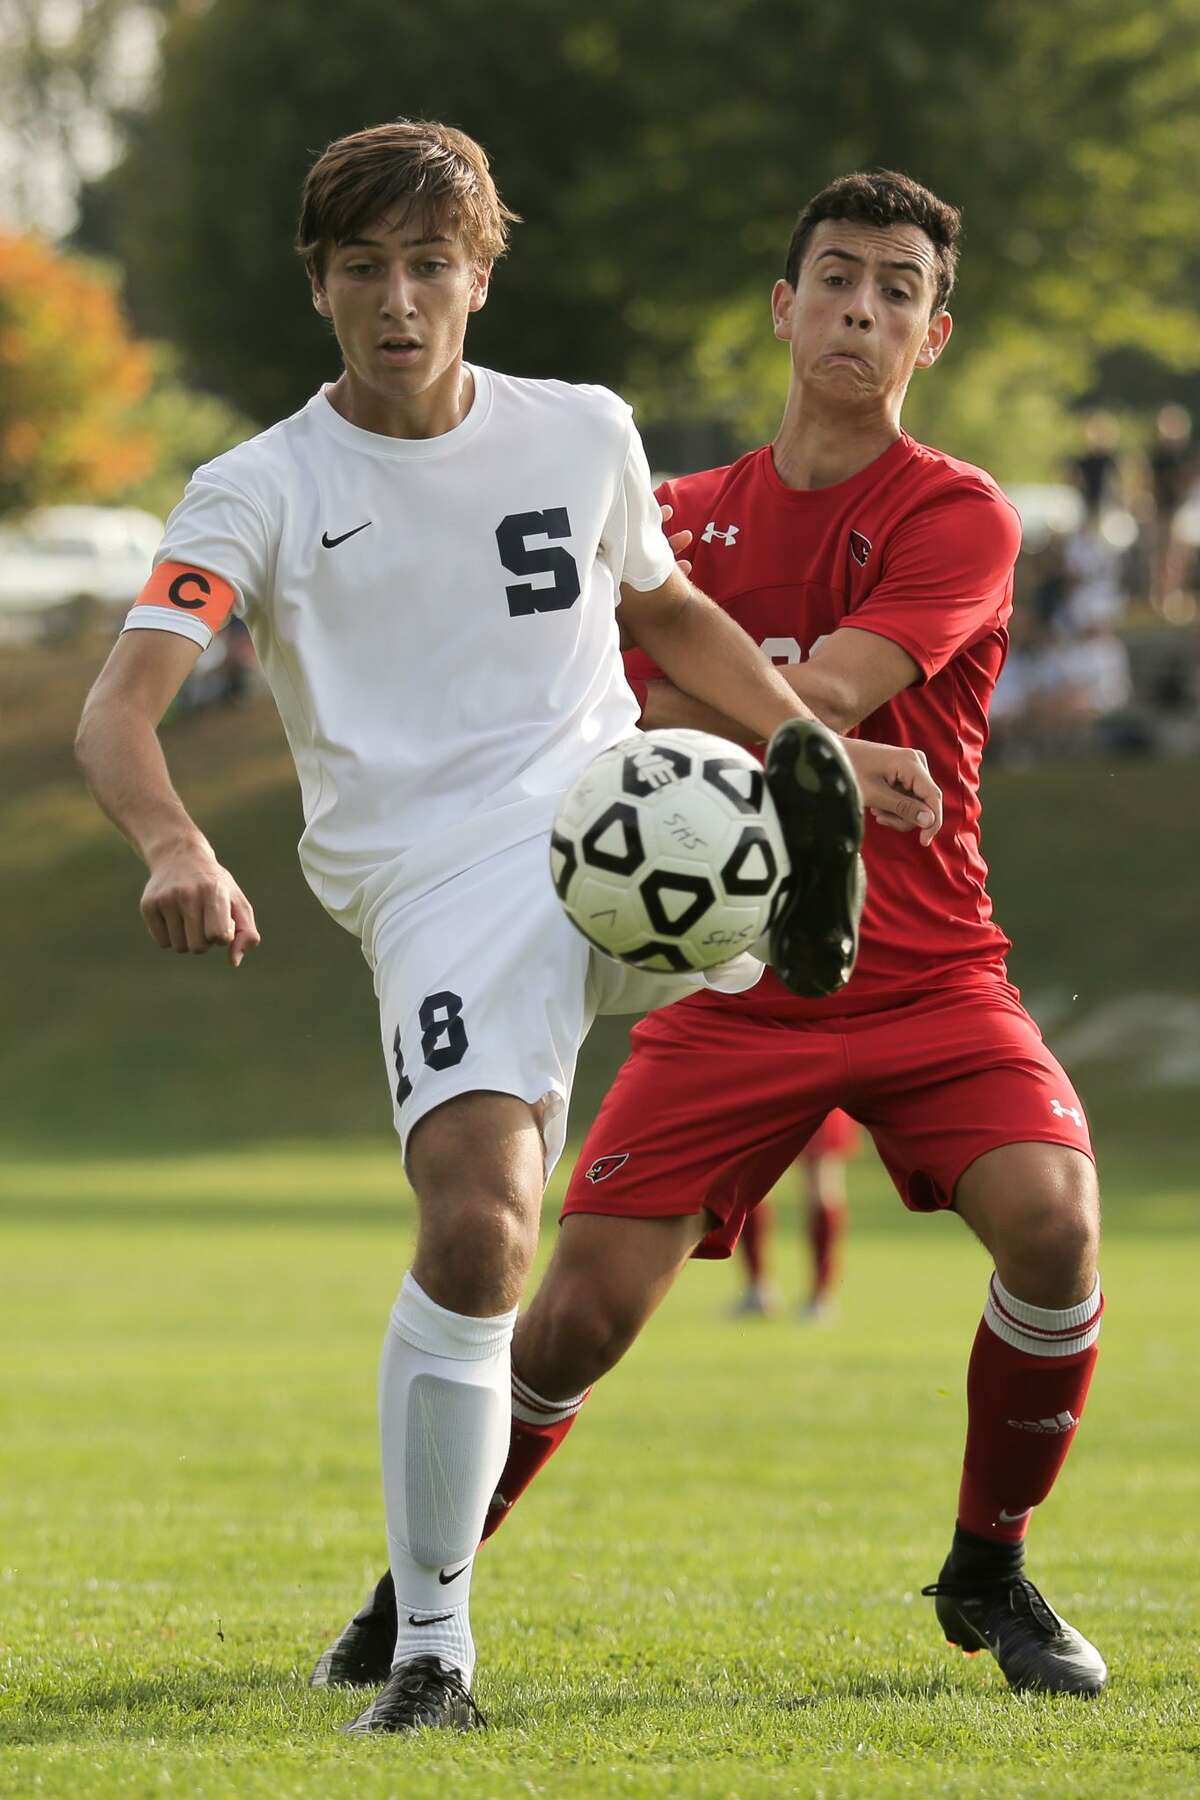 Matt Engler keeps the ball from Martin Garcia during Staples' 1-0 victory over Greenwich at Staples High School in Westport, Conn. on Monday, September 25, 2017.